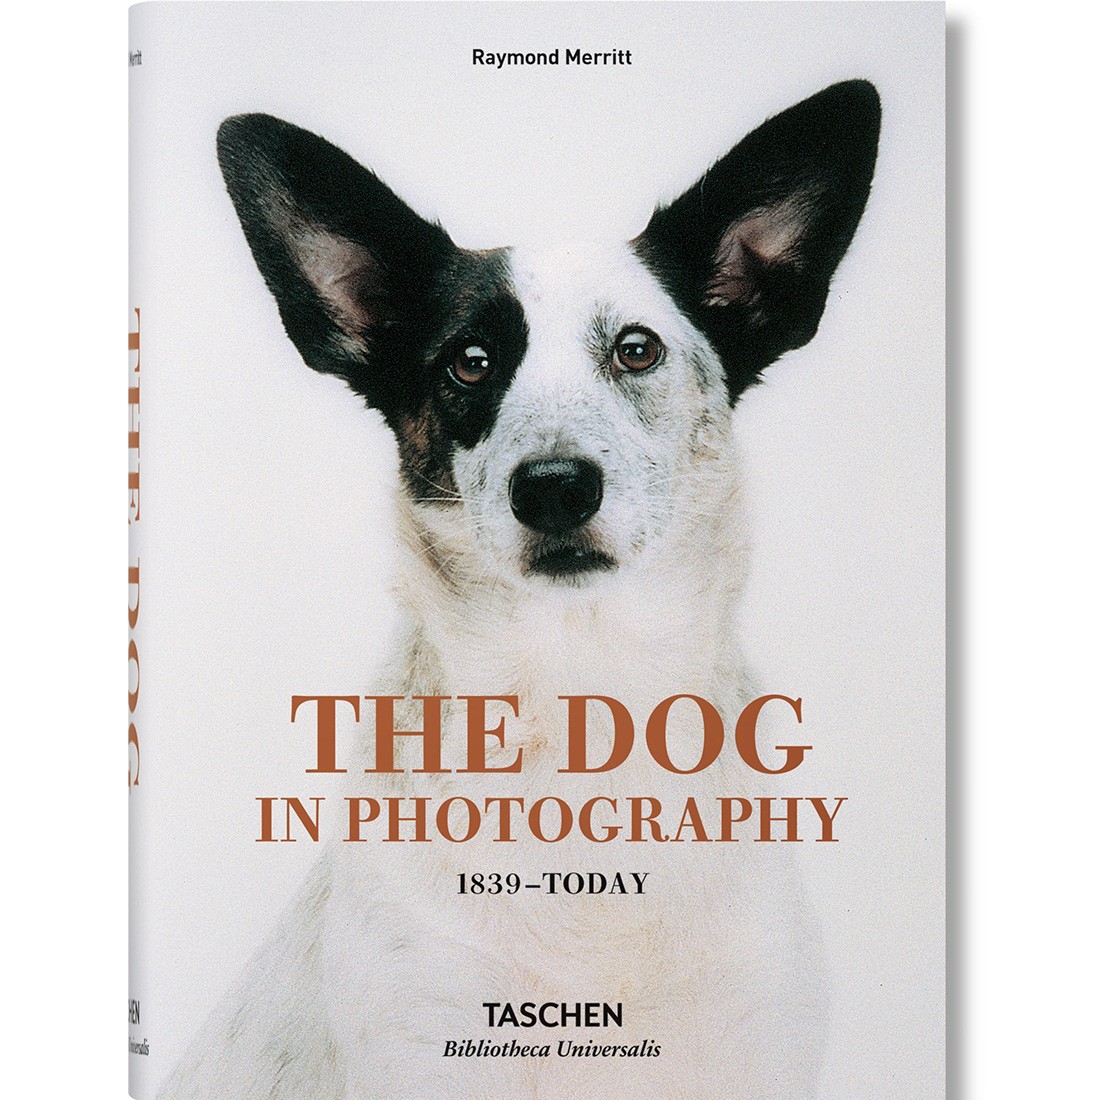 The Dog In Photography 1839-Today By Raymond Merritt Book (white / hardcover)